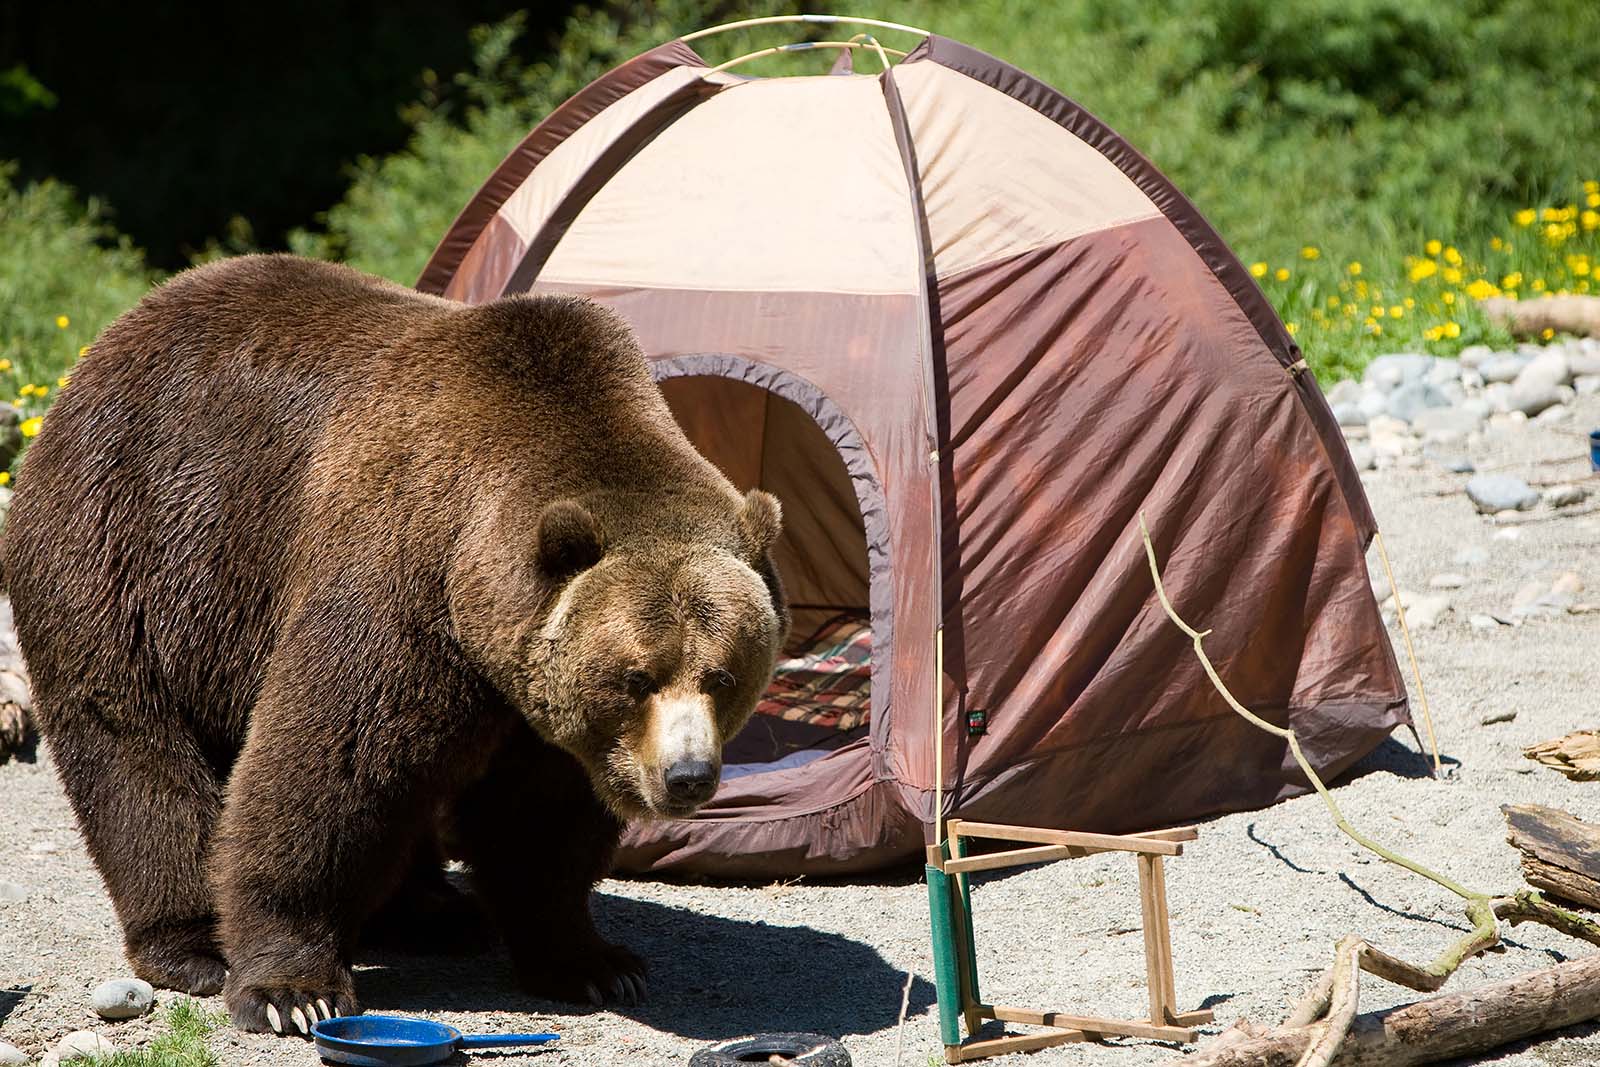 Camping tips: How to set up a tent? How to make a fire? How to prevent the intrusion of wild animals?